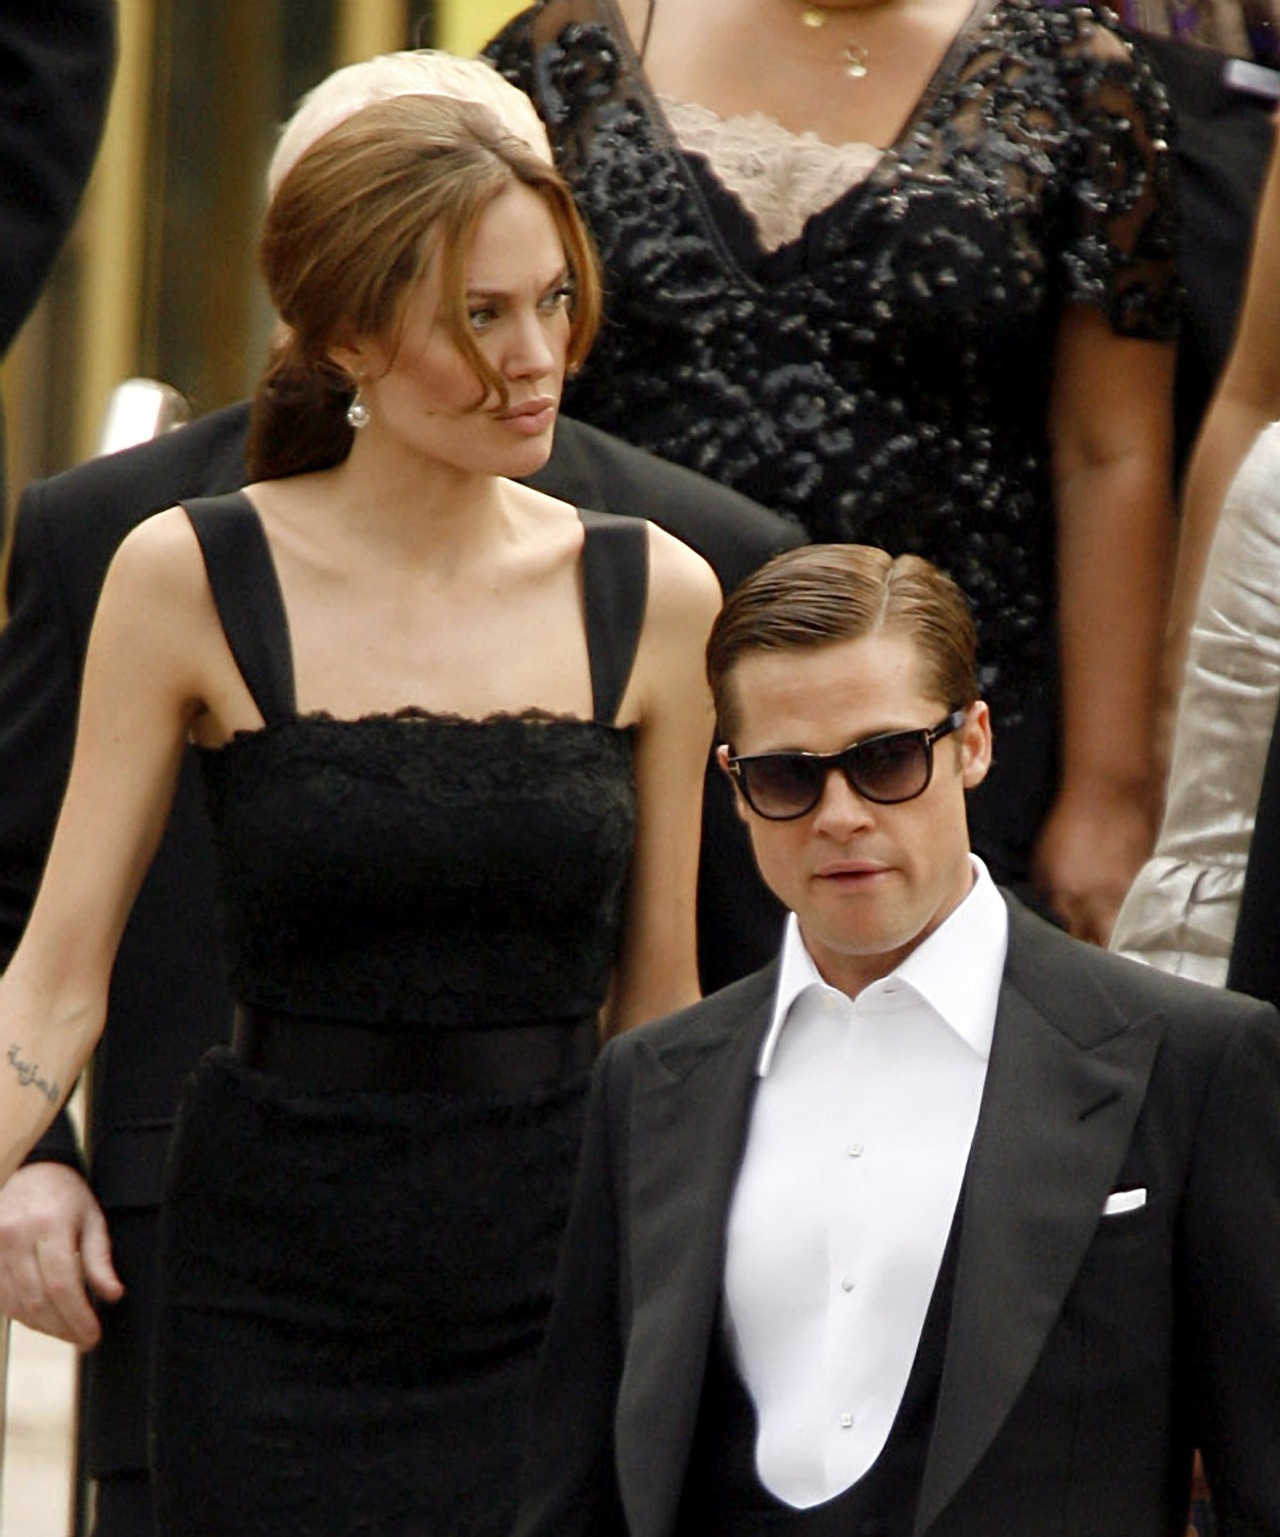 Angelina Jolie and Brad Pitt at the 2007 Cannes Film Festival